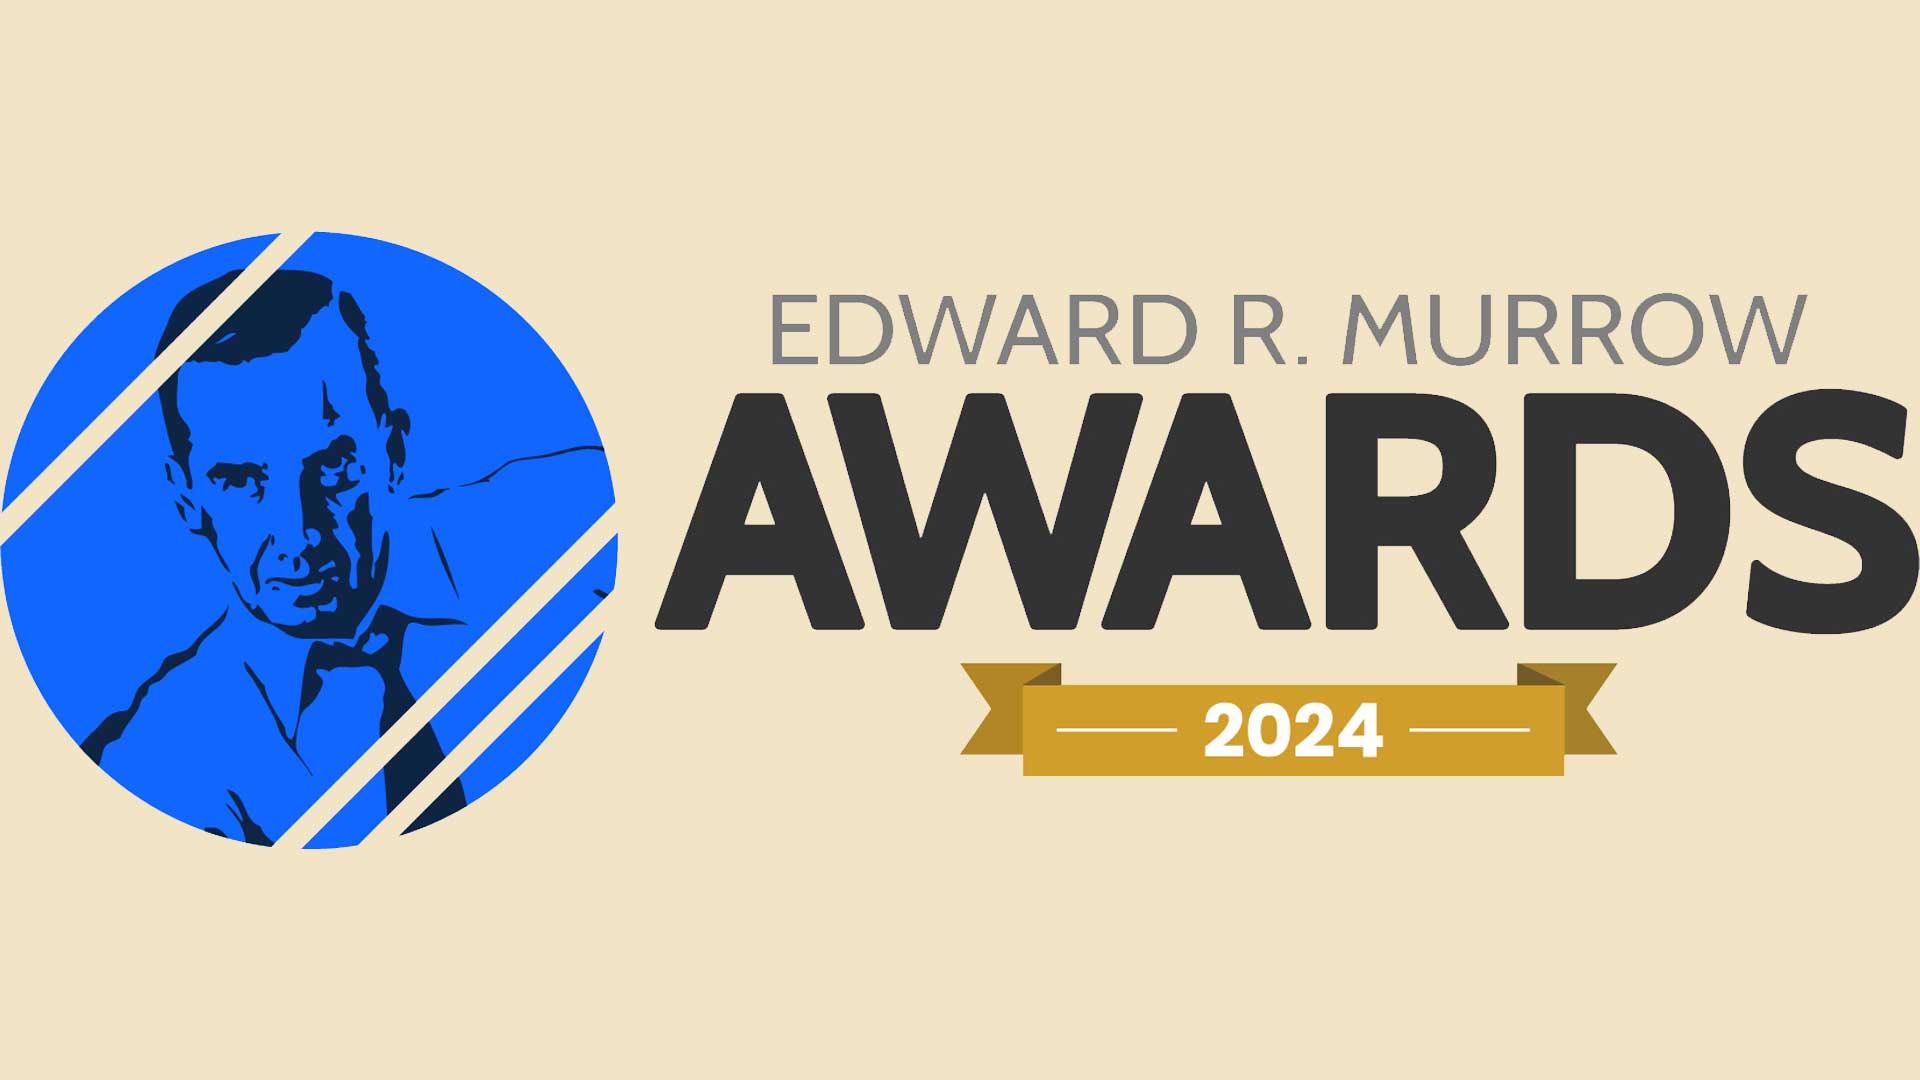 Arizona Public Media received nine regional Edward R. Murrow Awards in categories including Excellence in Innovation, DEI and Investigative Reporting.